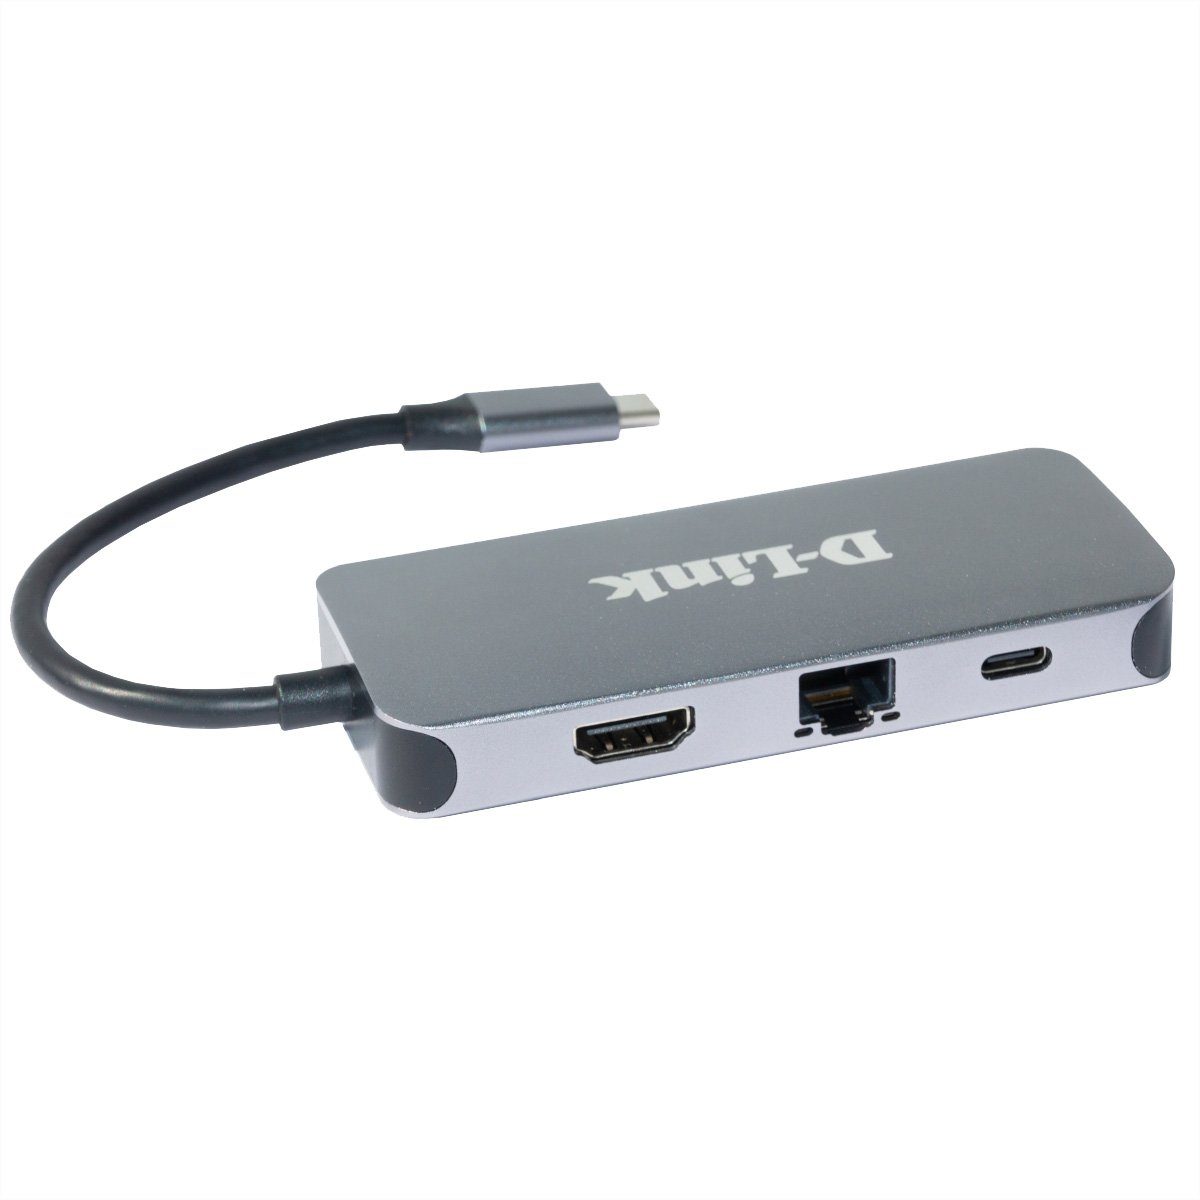 Ethernet/Power 6-in-1 Computer-Adapter Hub HDMI/Gigabit D-Link USB-C Delivery DUB-2335 mit